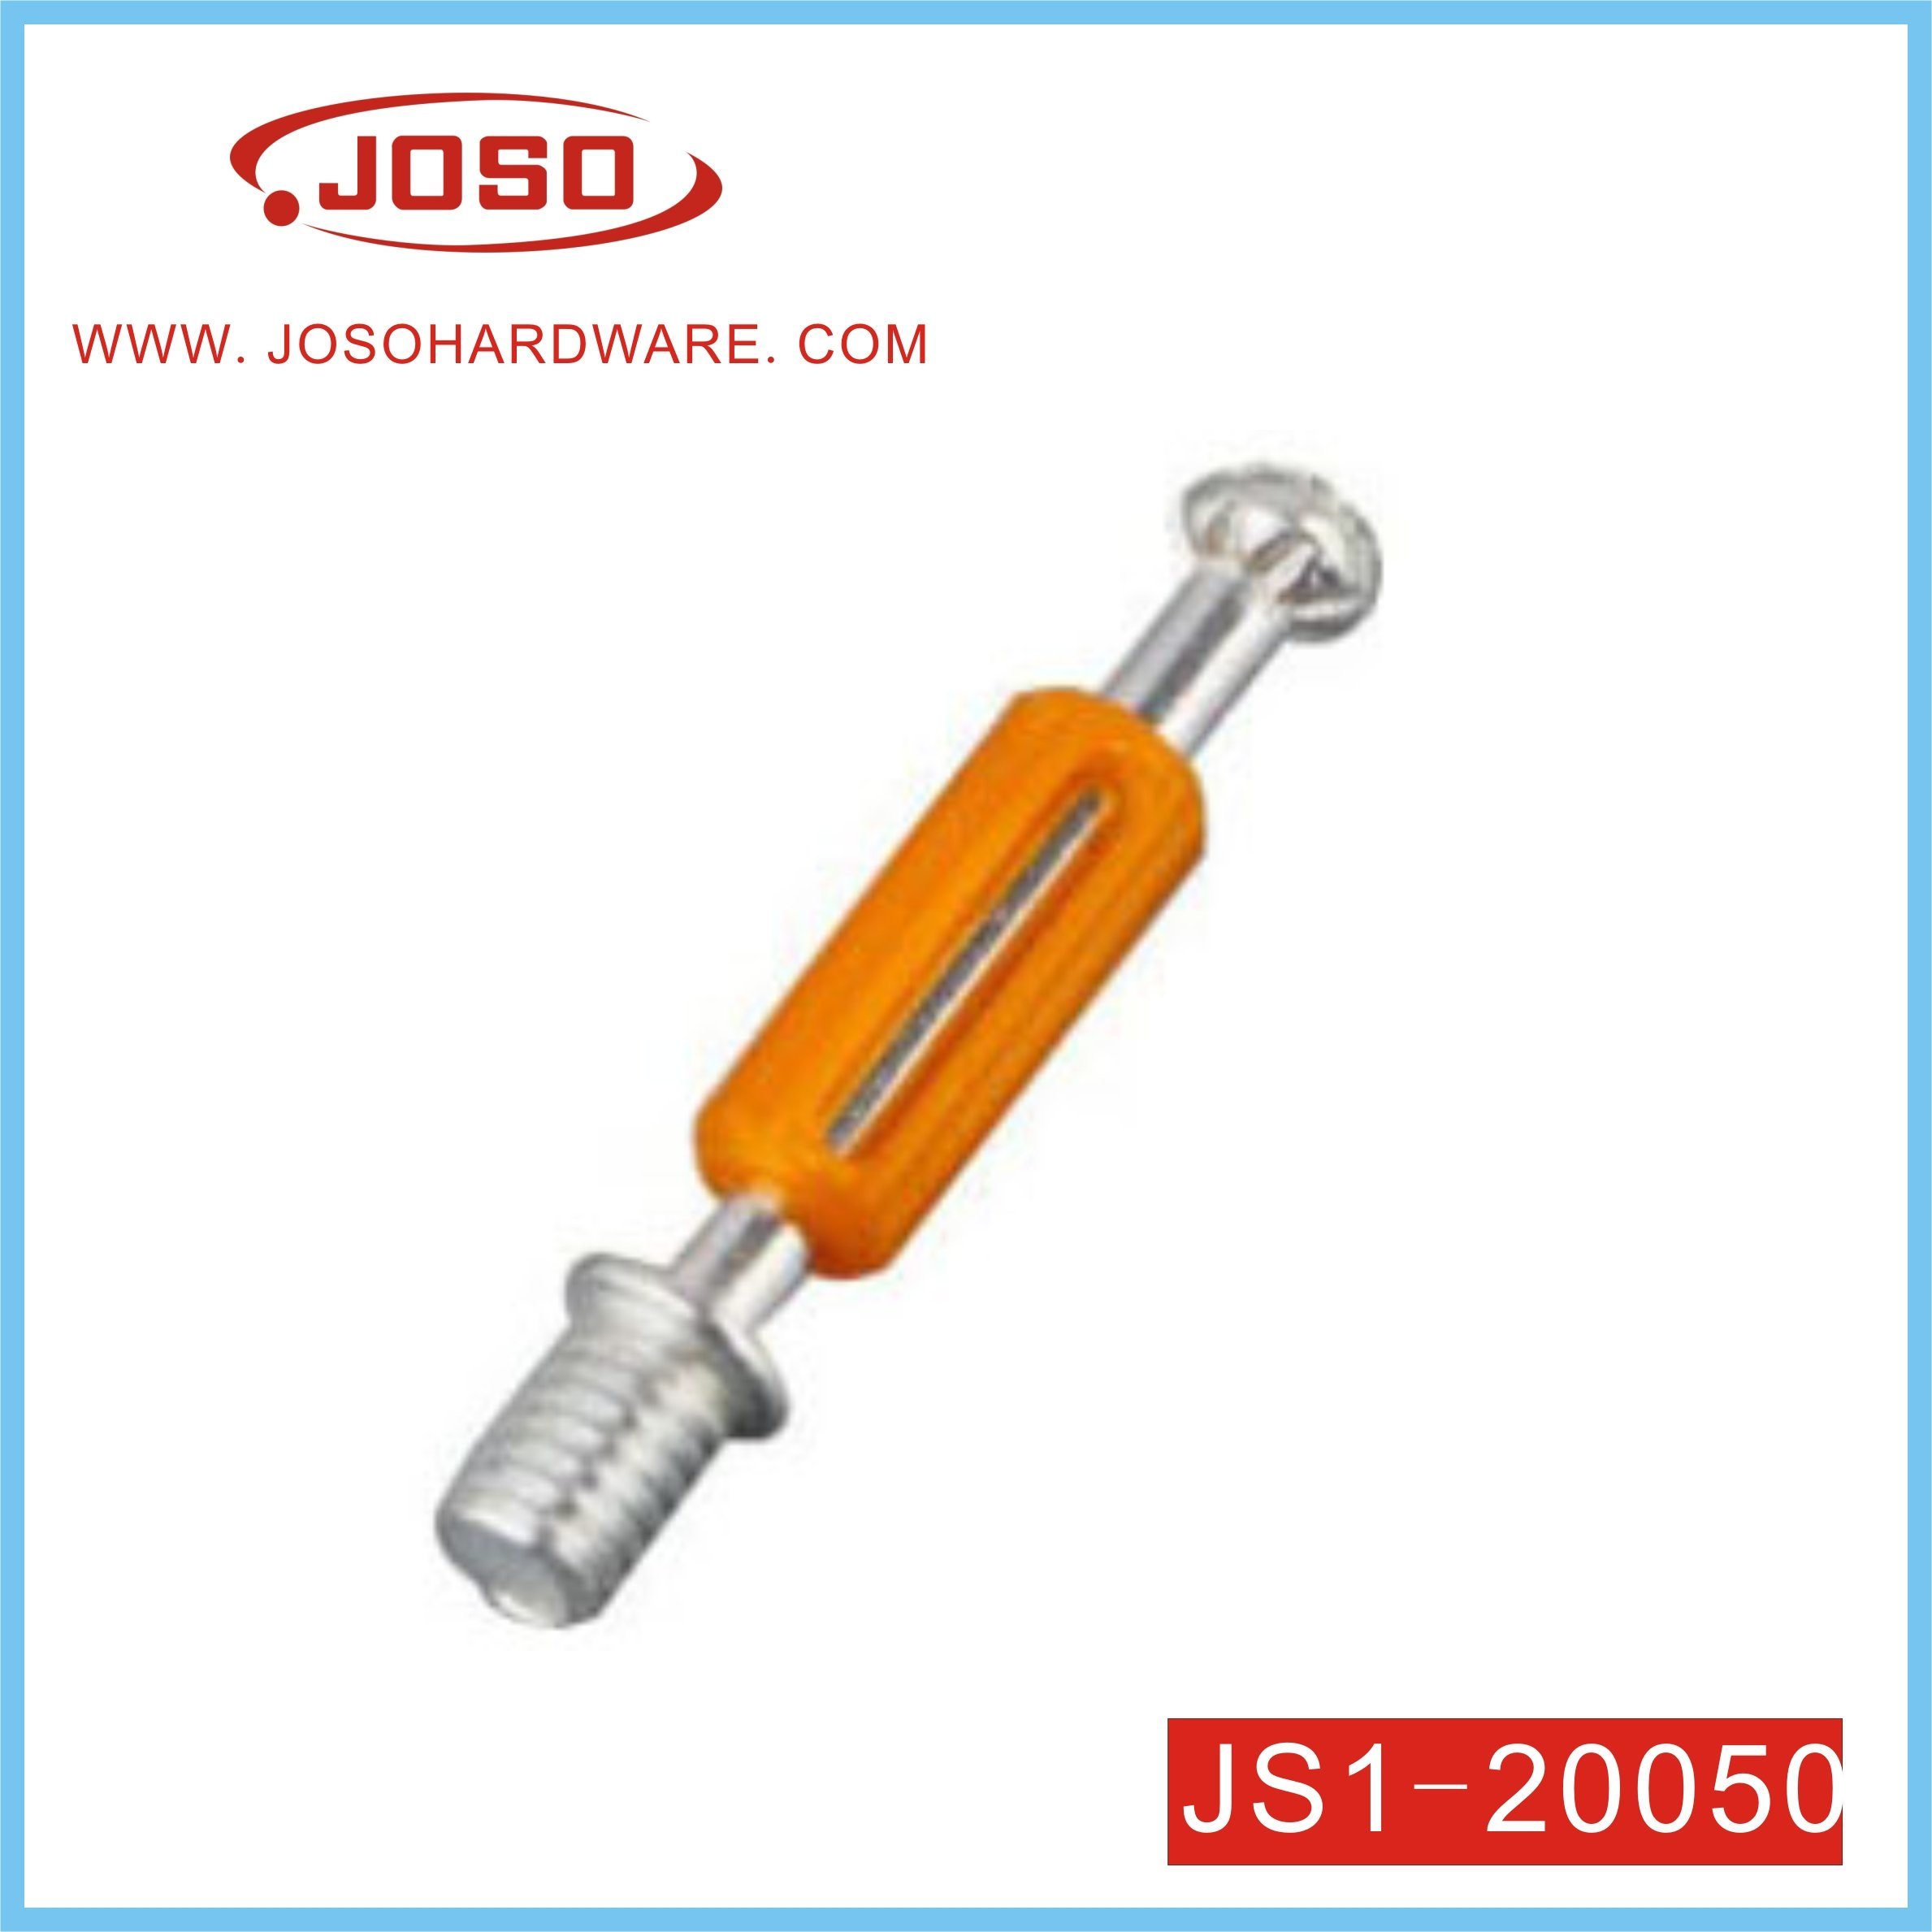 Hot Selling steel with Orange Plastic Bolt of Furniture Hardware for Connector